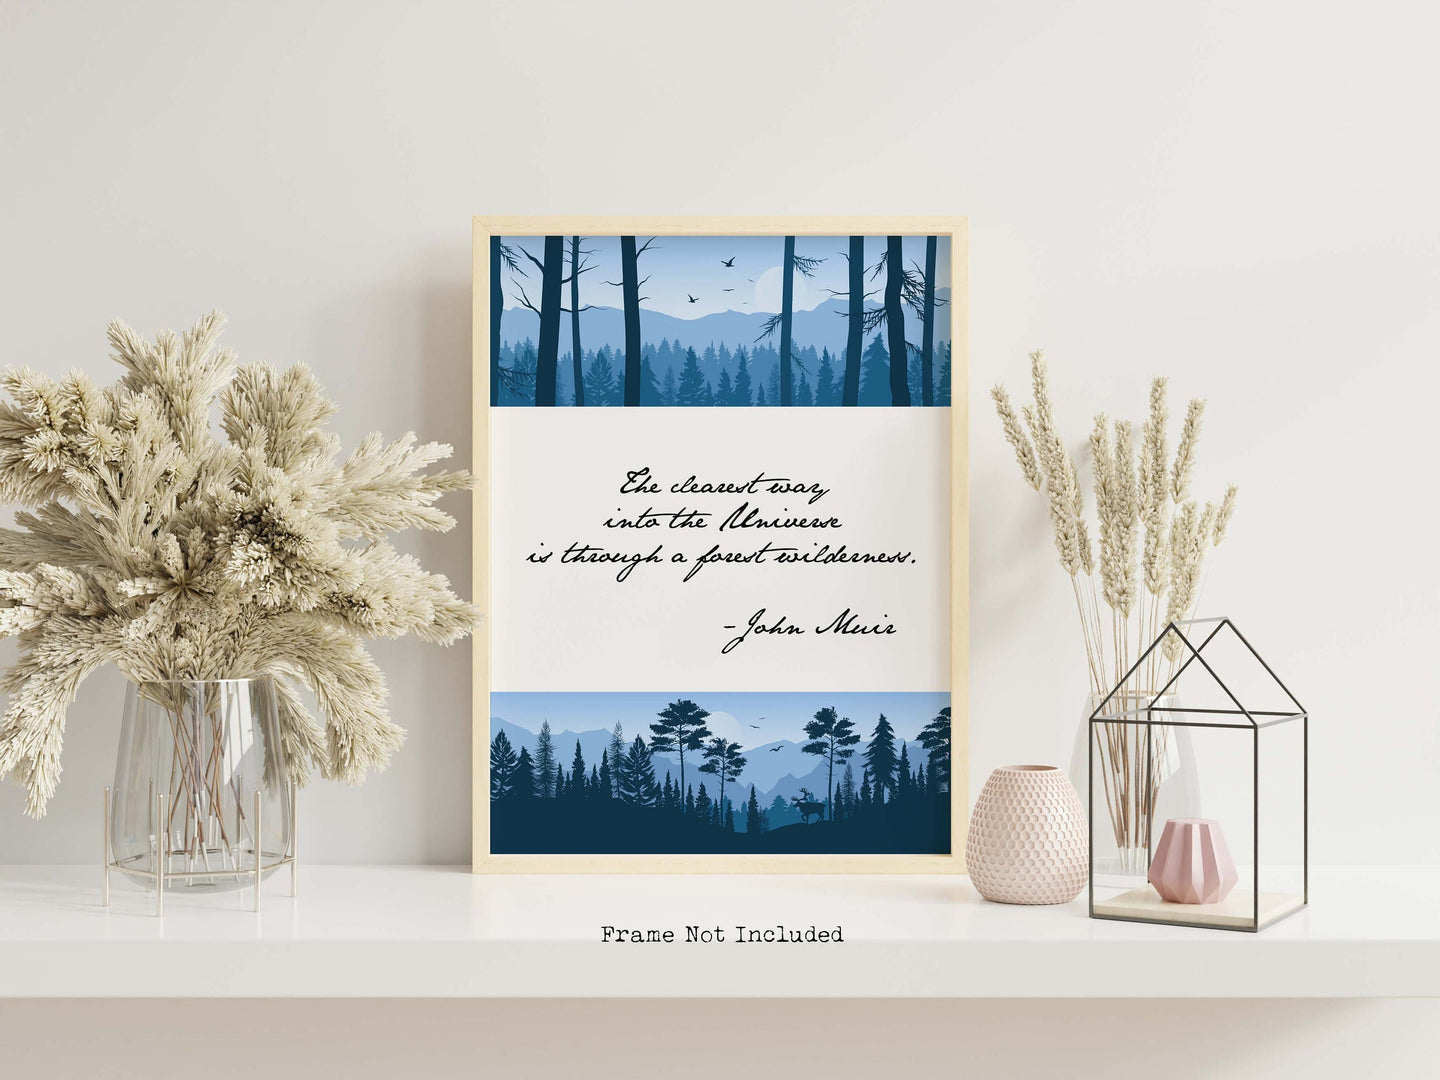 John Muir Quote - The clearest way into the Universe is through a forest wilderness - Physical print without frame